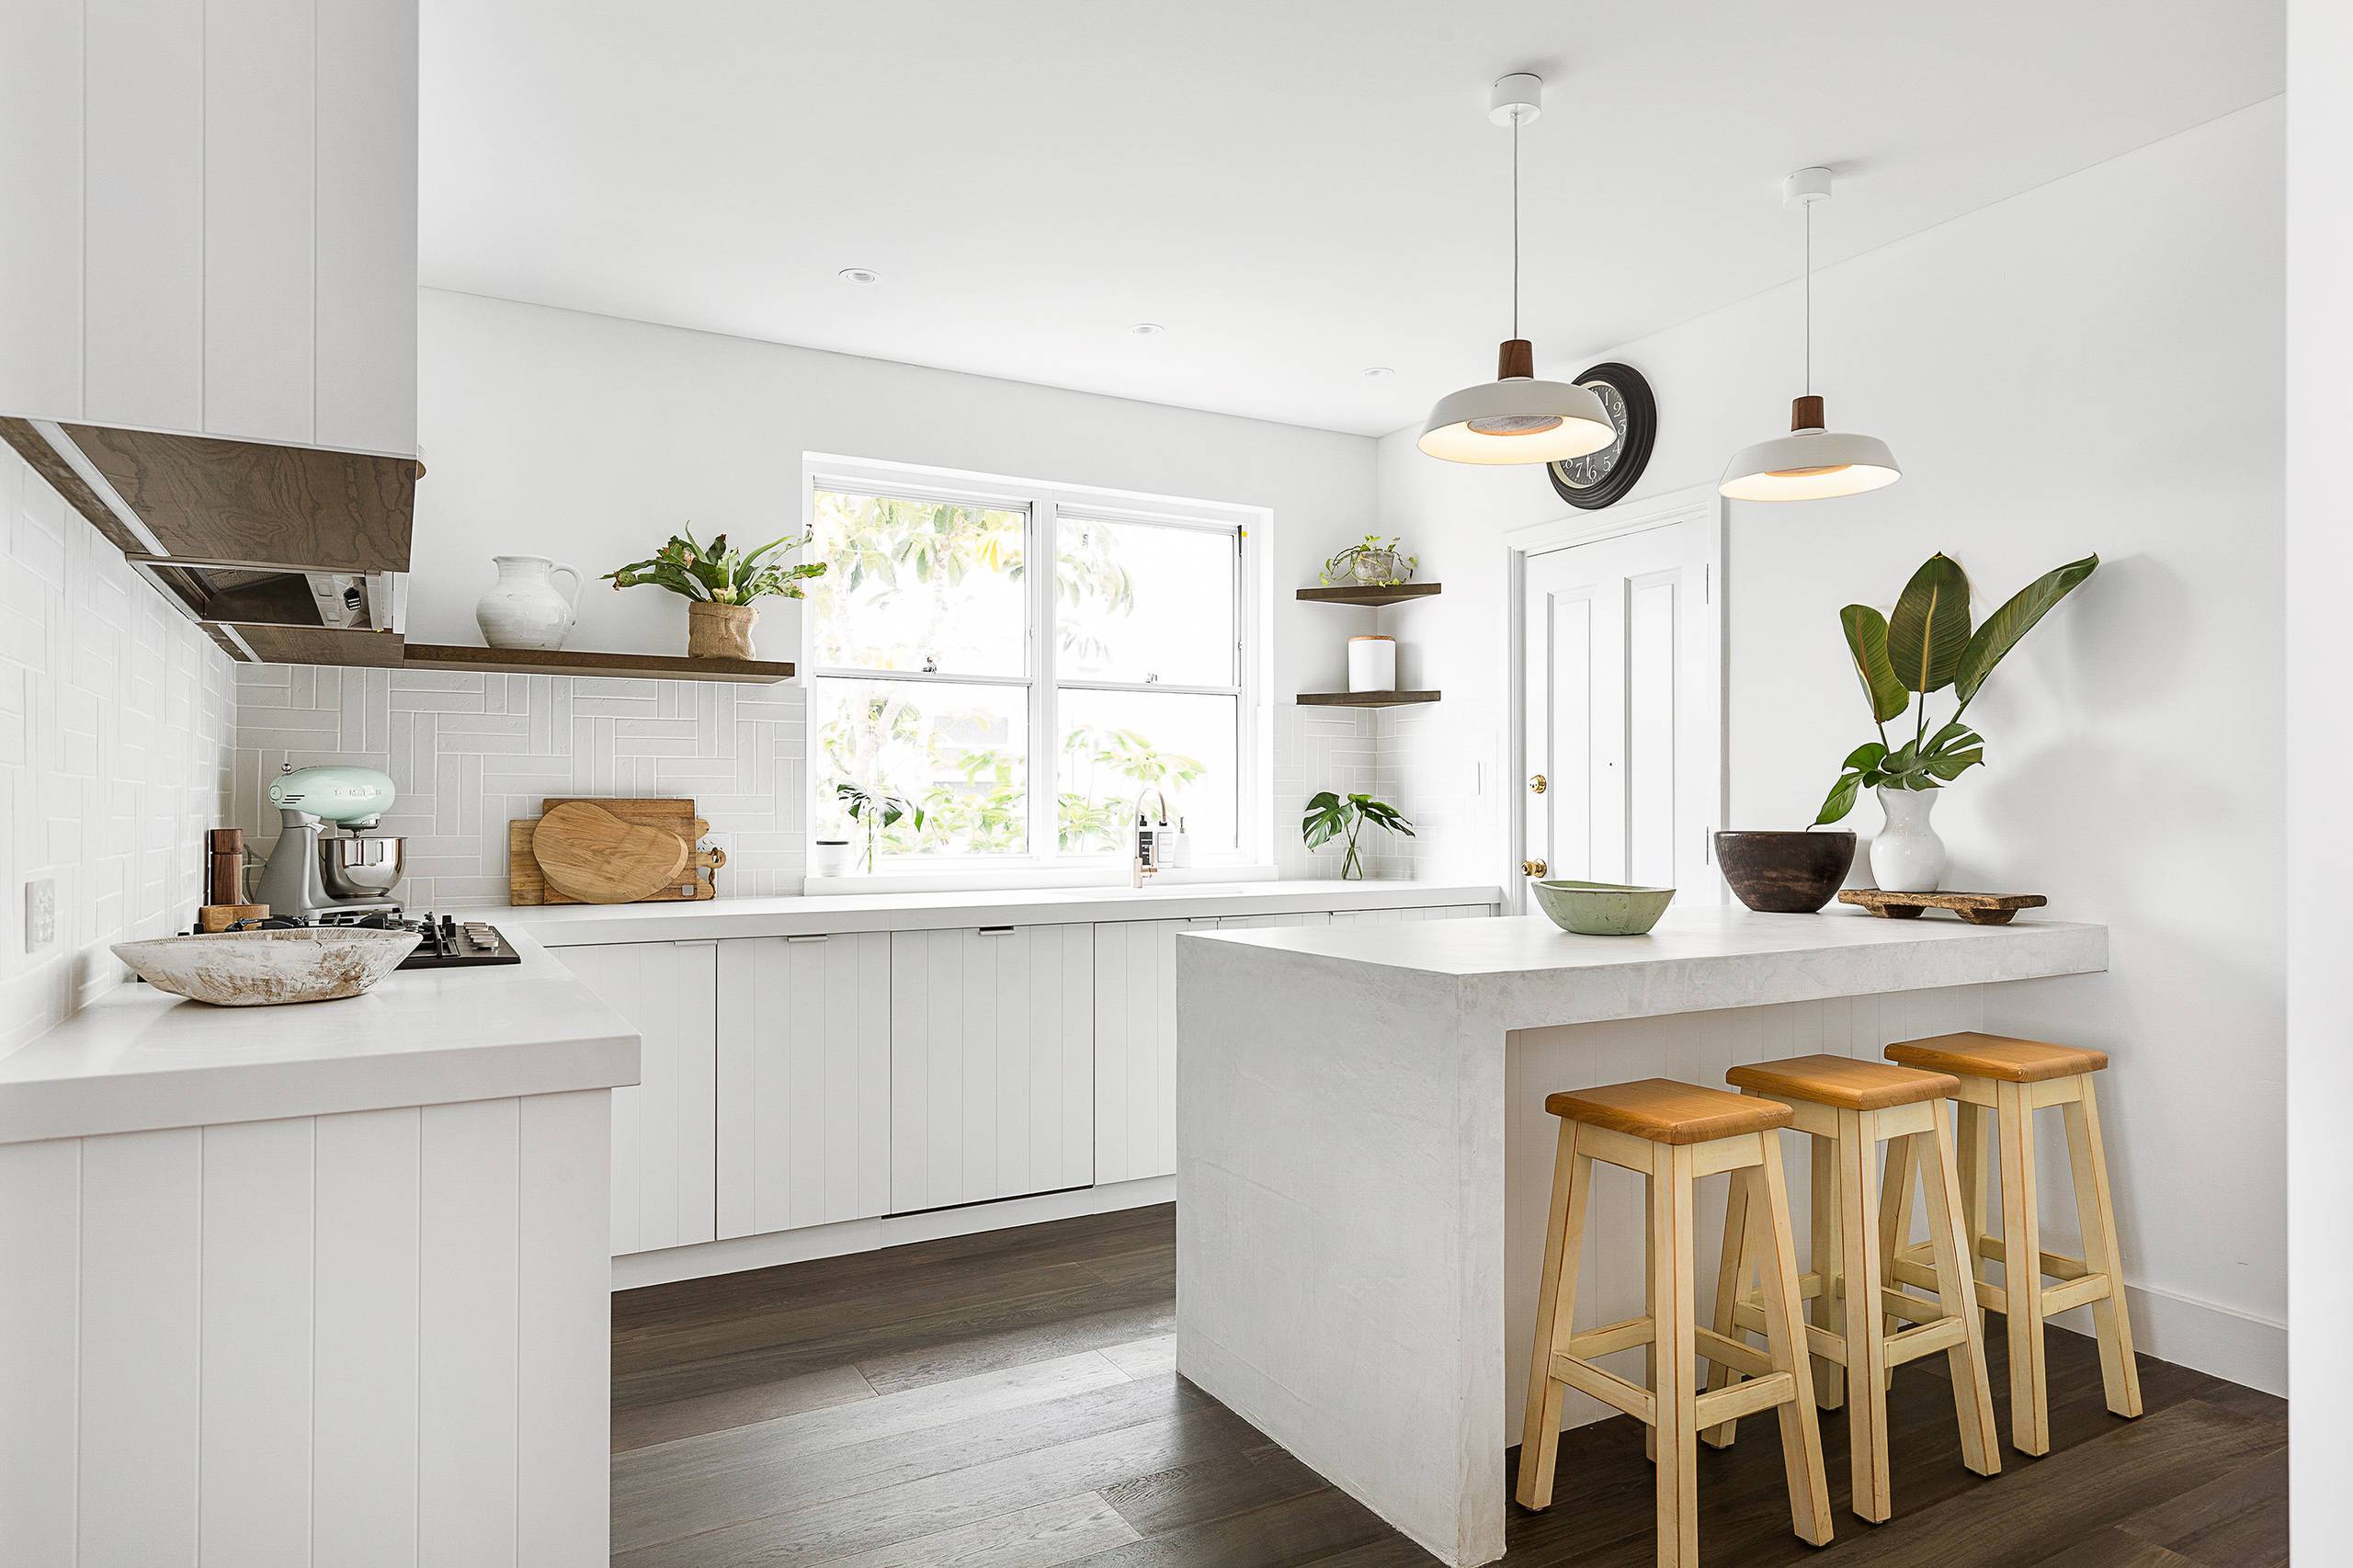 White cabinets and open shelving for an airy feel (from Houzz)